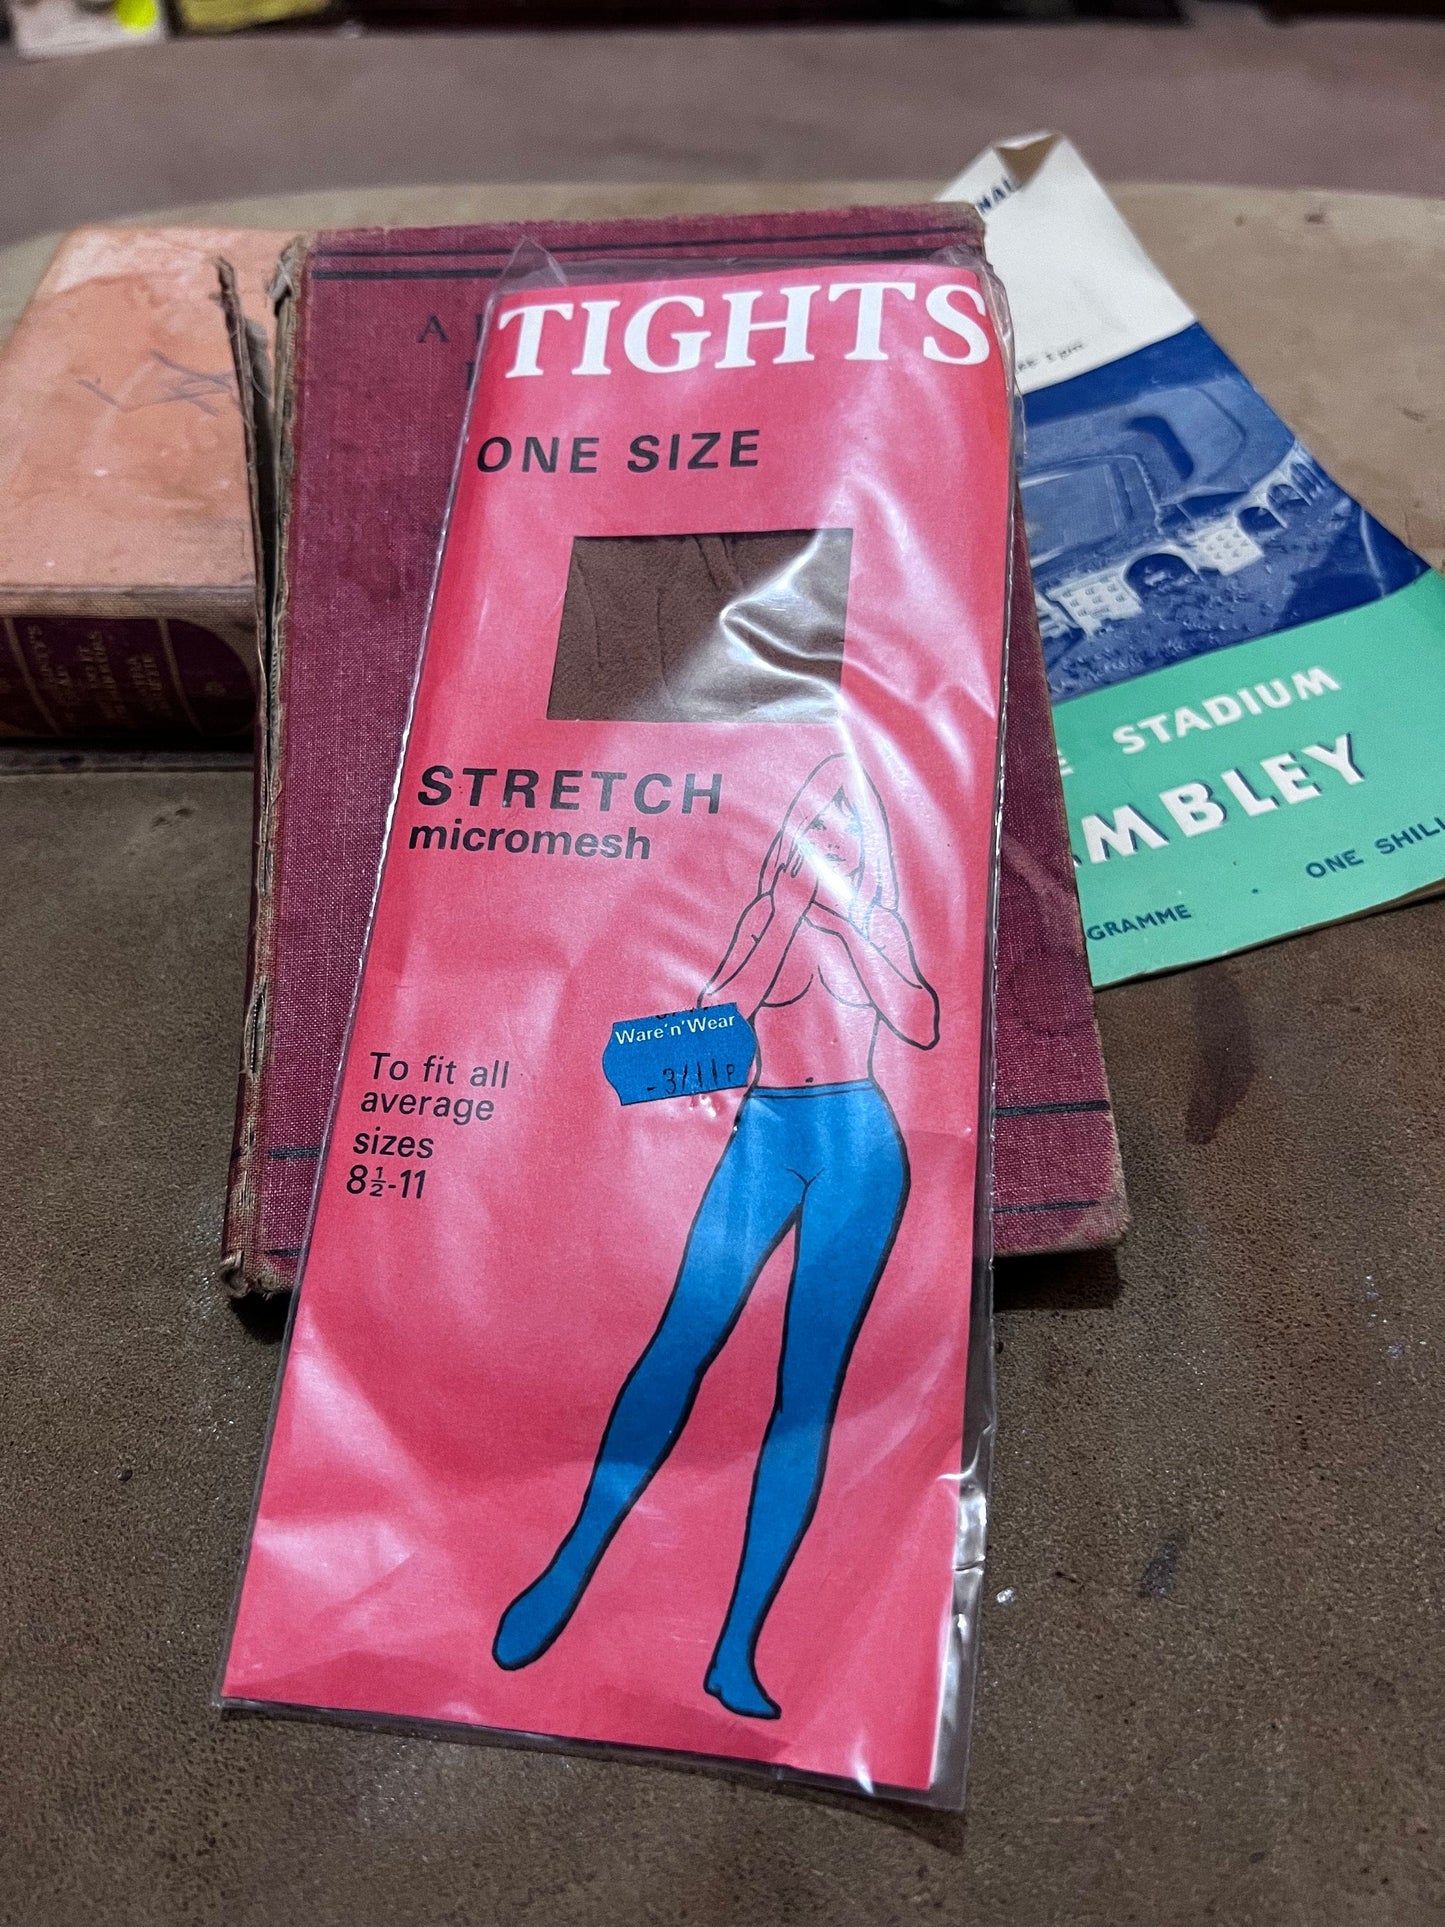 Vintage Womens Dark Tan Tights Deadstock Tights Black and Brown Retro 60s 70s 1960s 1970s New in Packaging, vintage tights, vintage